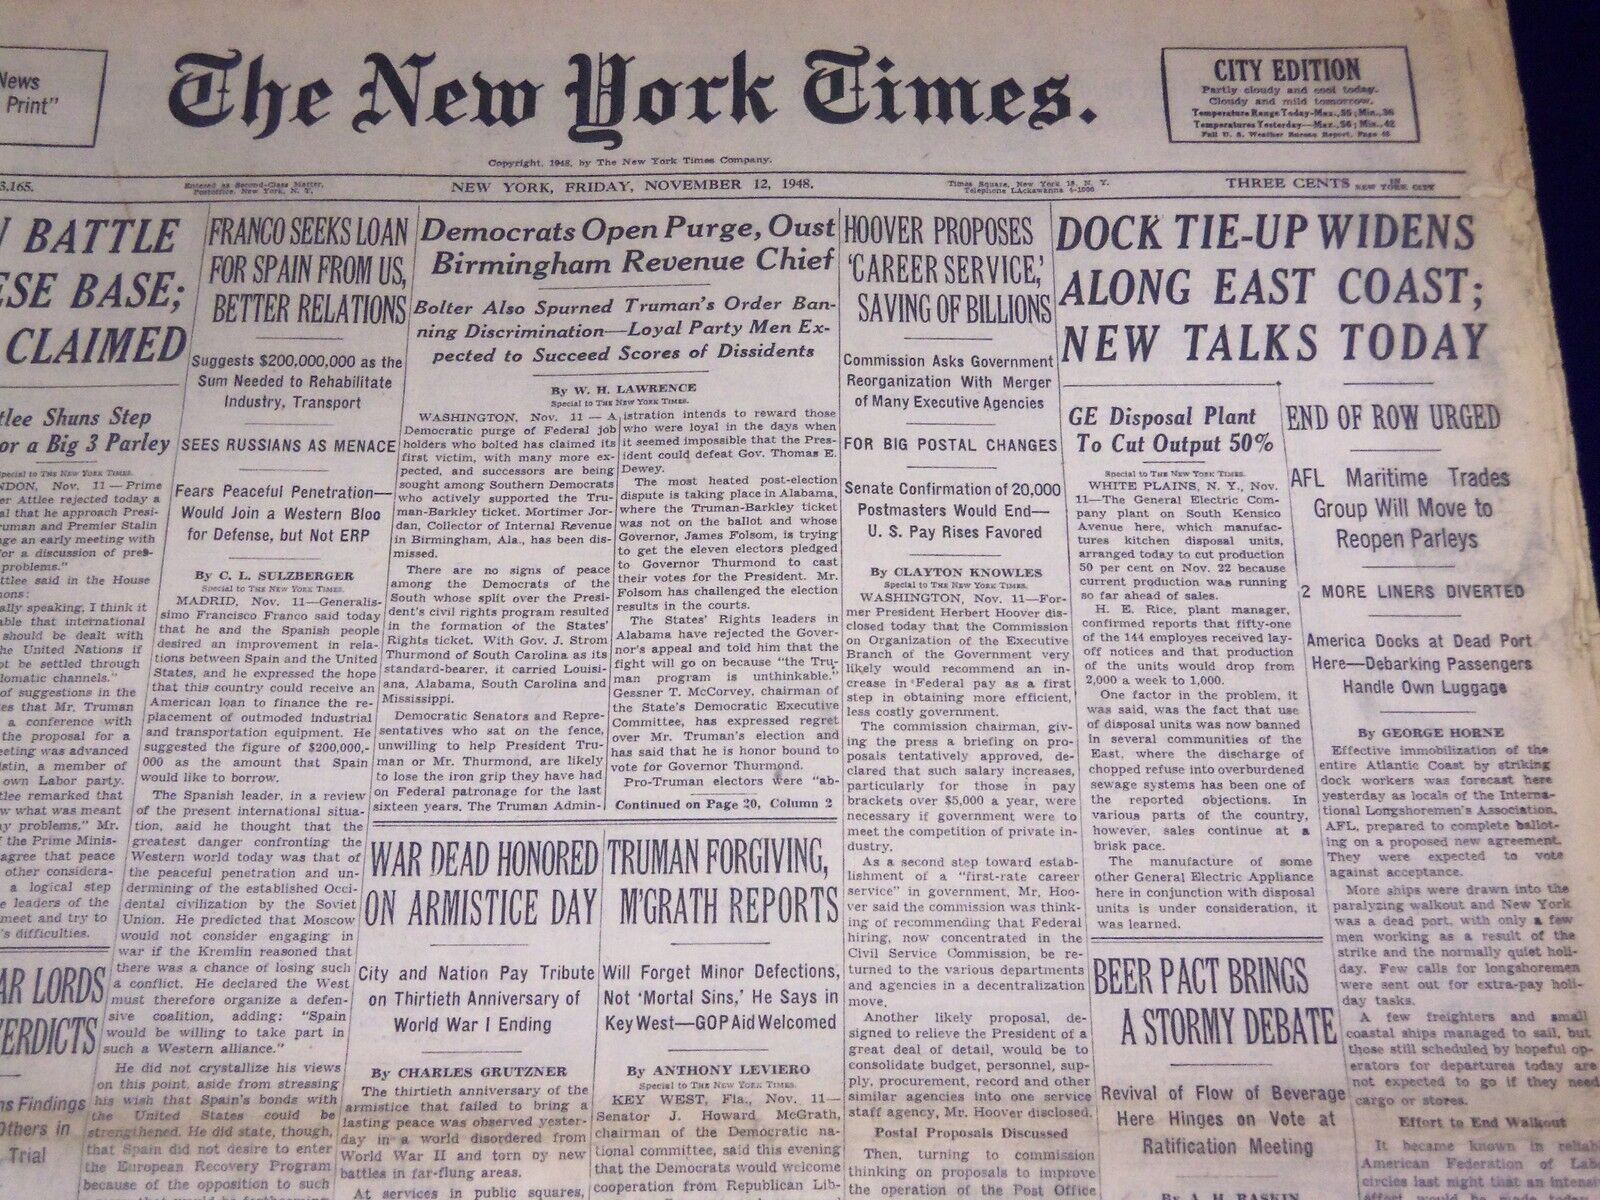 1948 NOVEMBER 12 NEW YORK TIMES - DOCK TIE-UP WIDENS - NT 3526